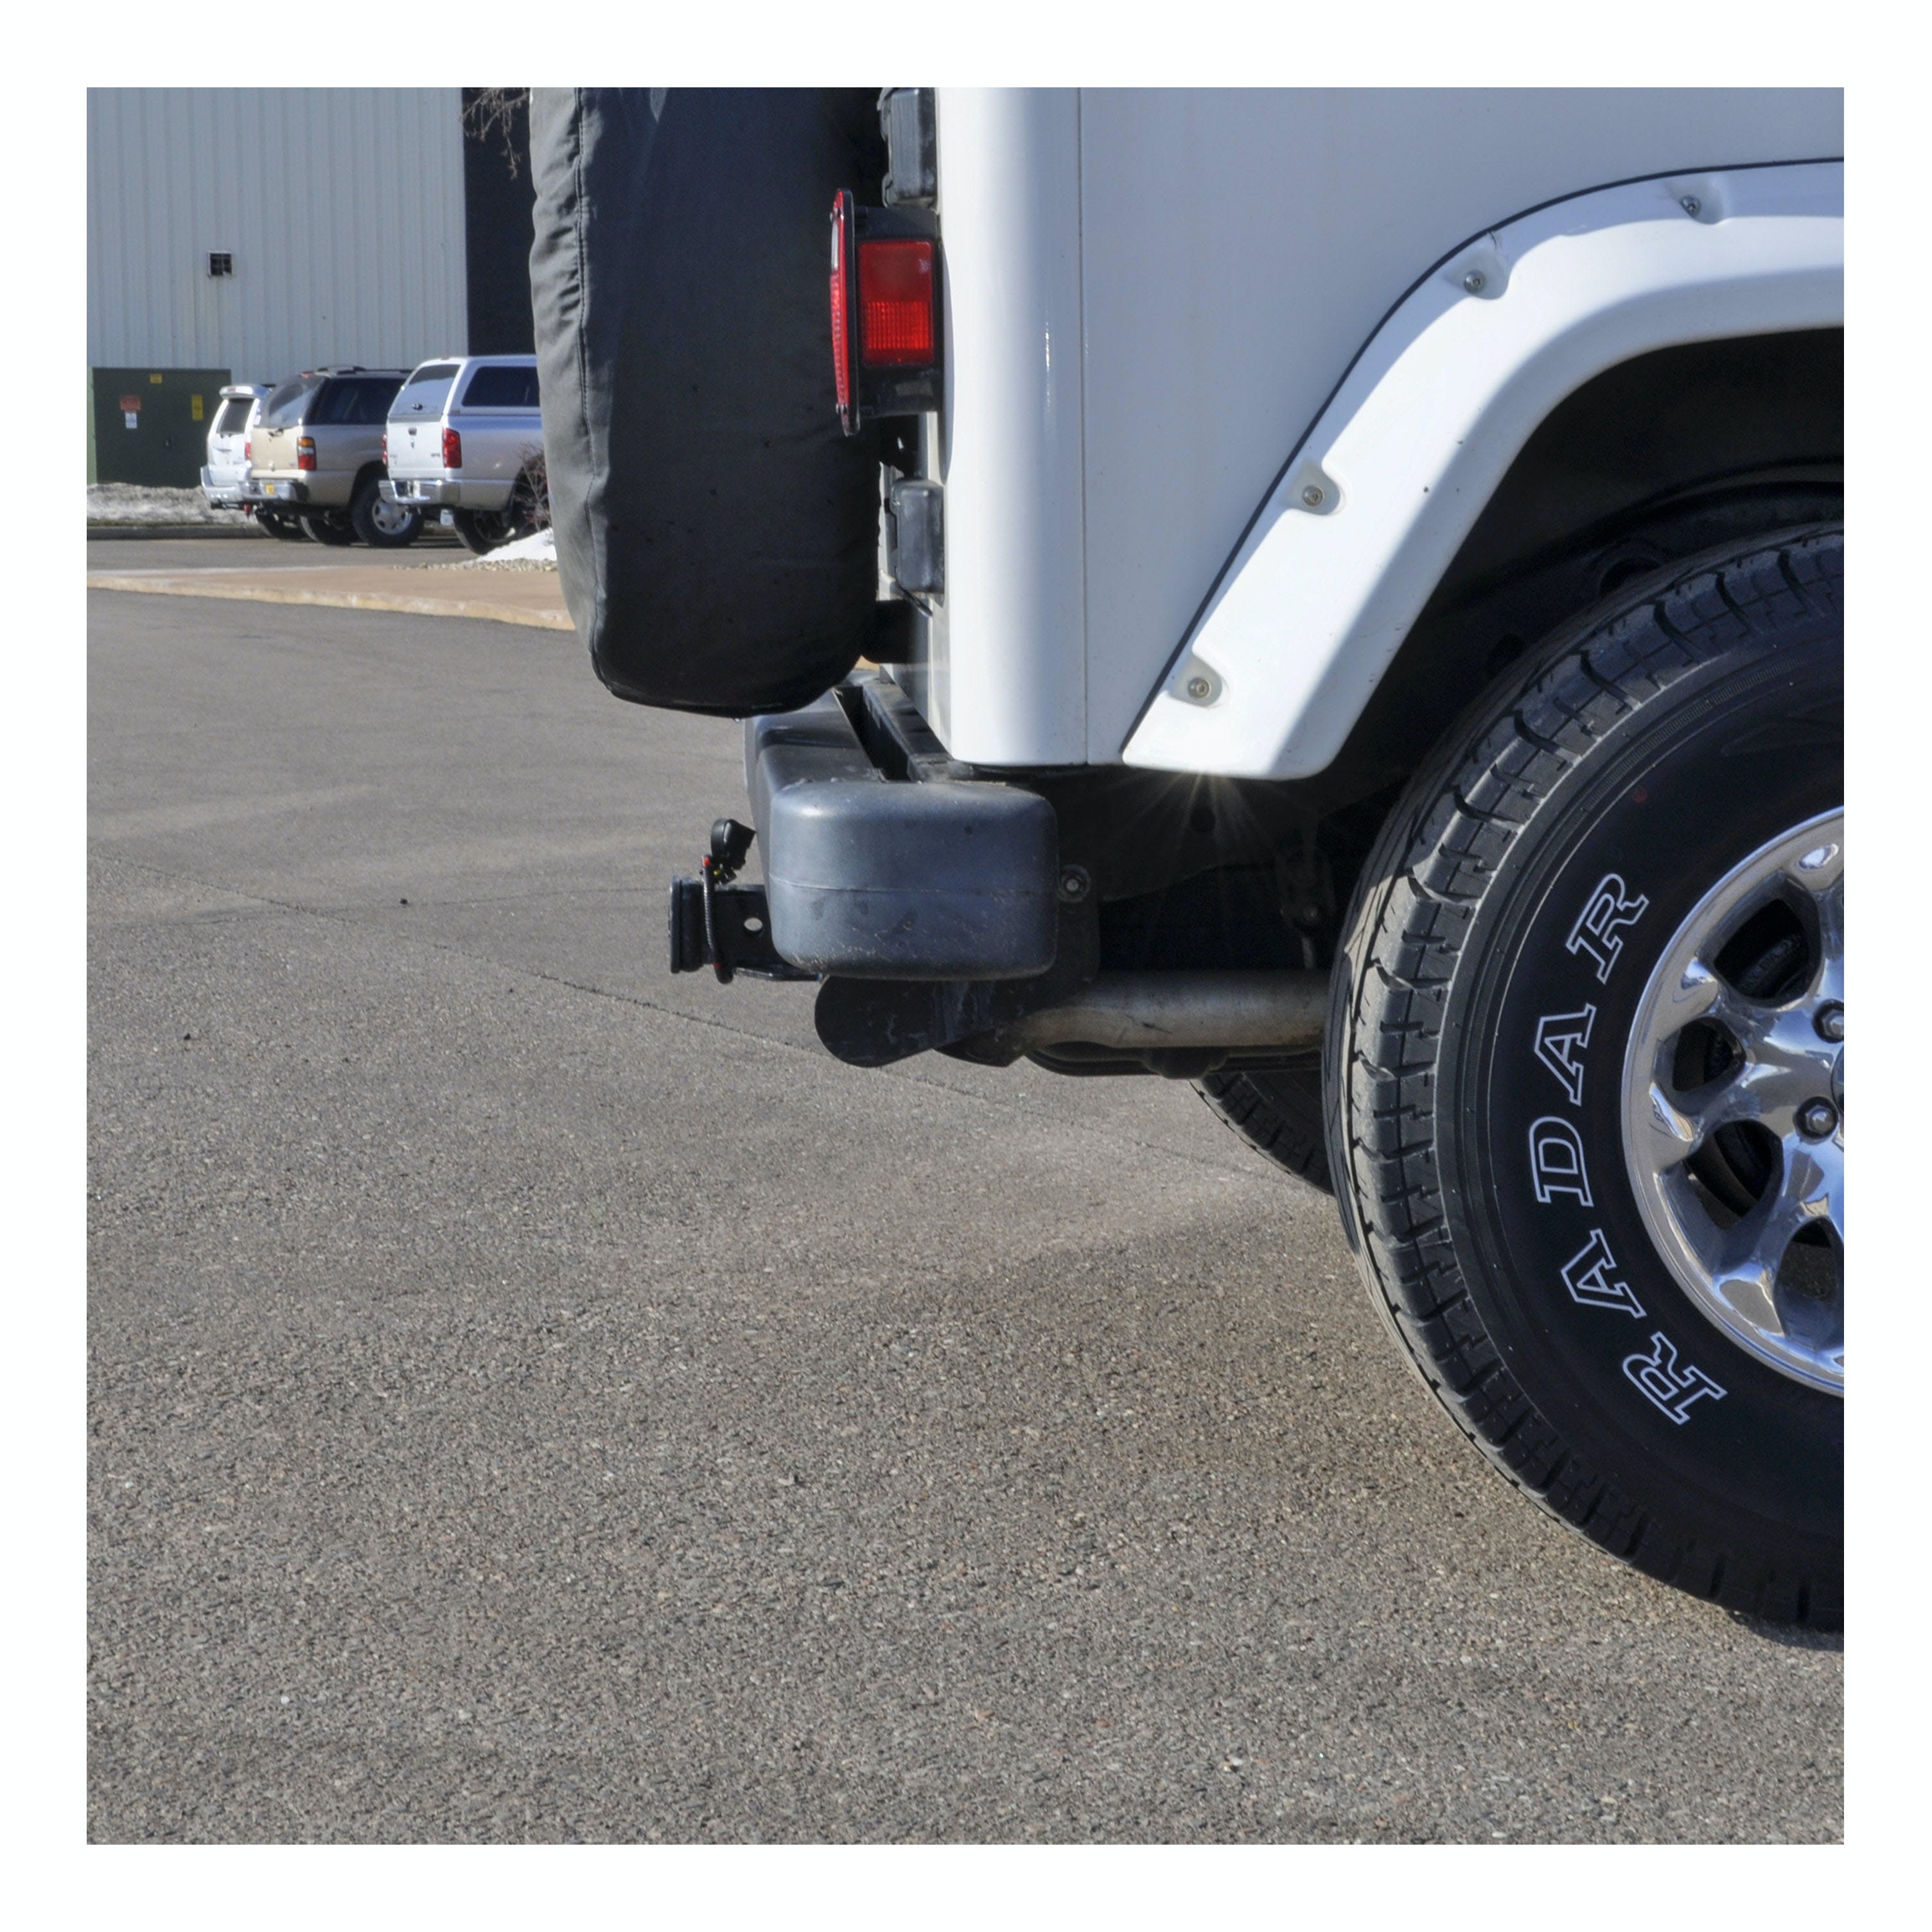 CURT 13430 Class 3 Trailer Hitch, 2 Receiver, Select Jeep Wrangler TJ (Round Tube Frame)